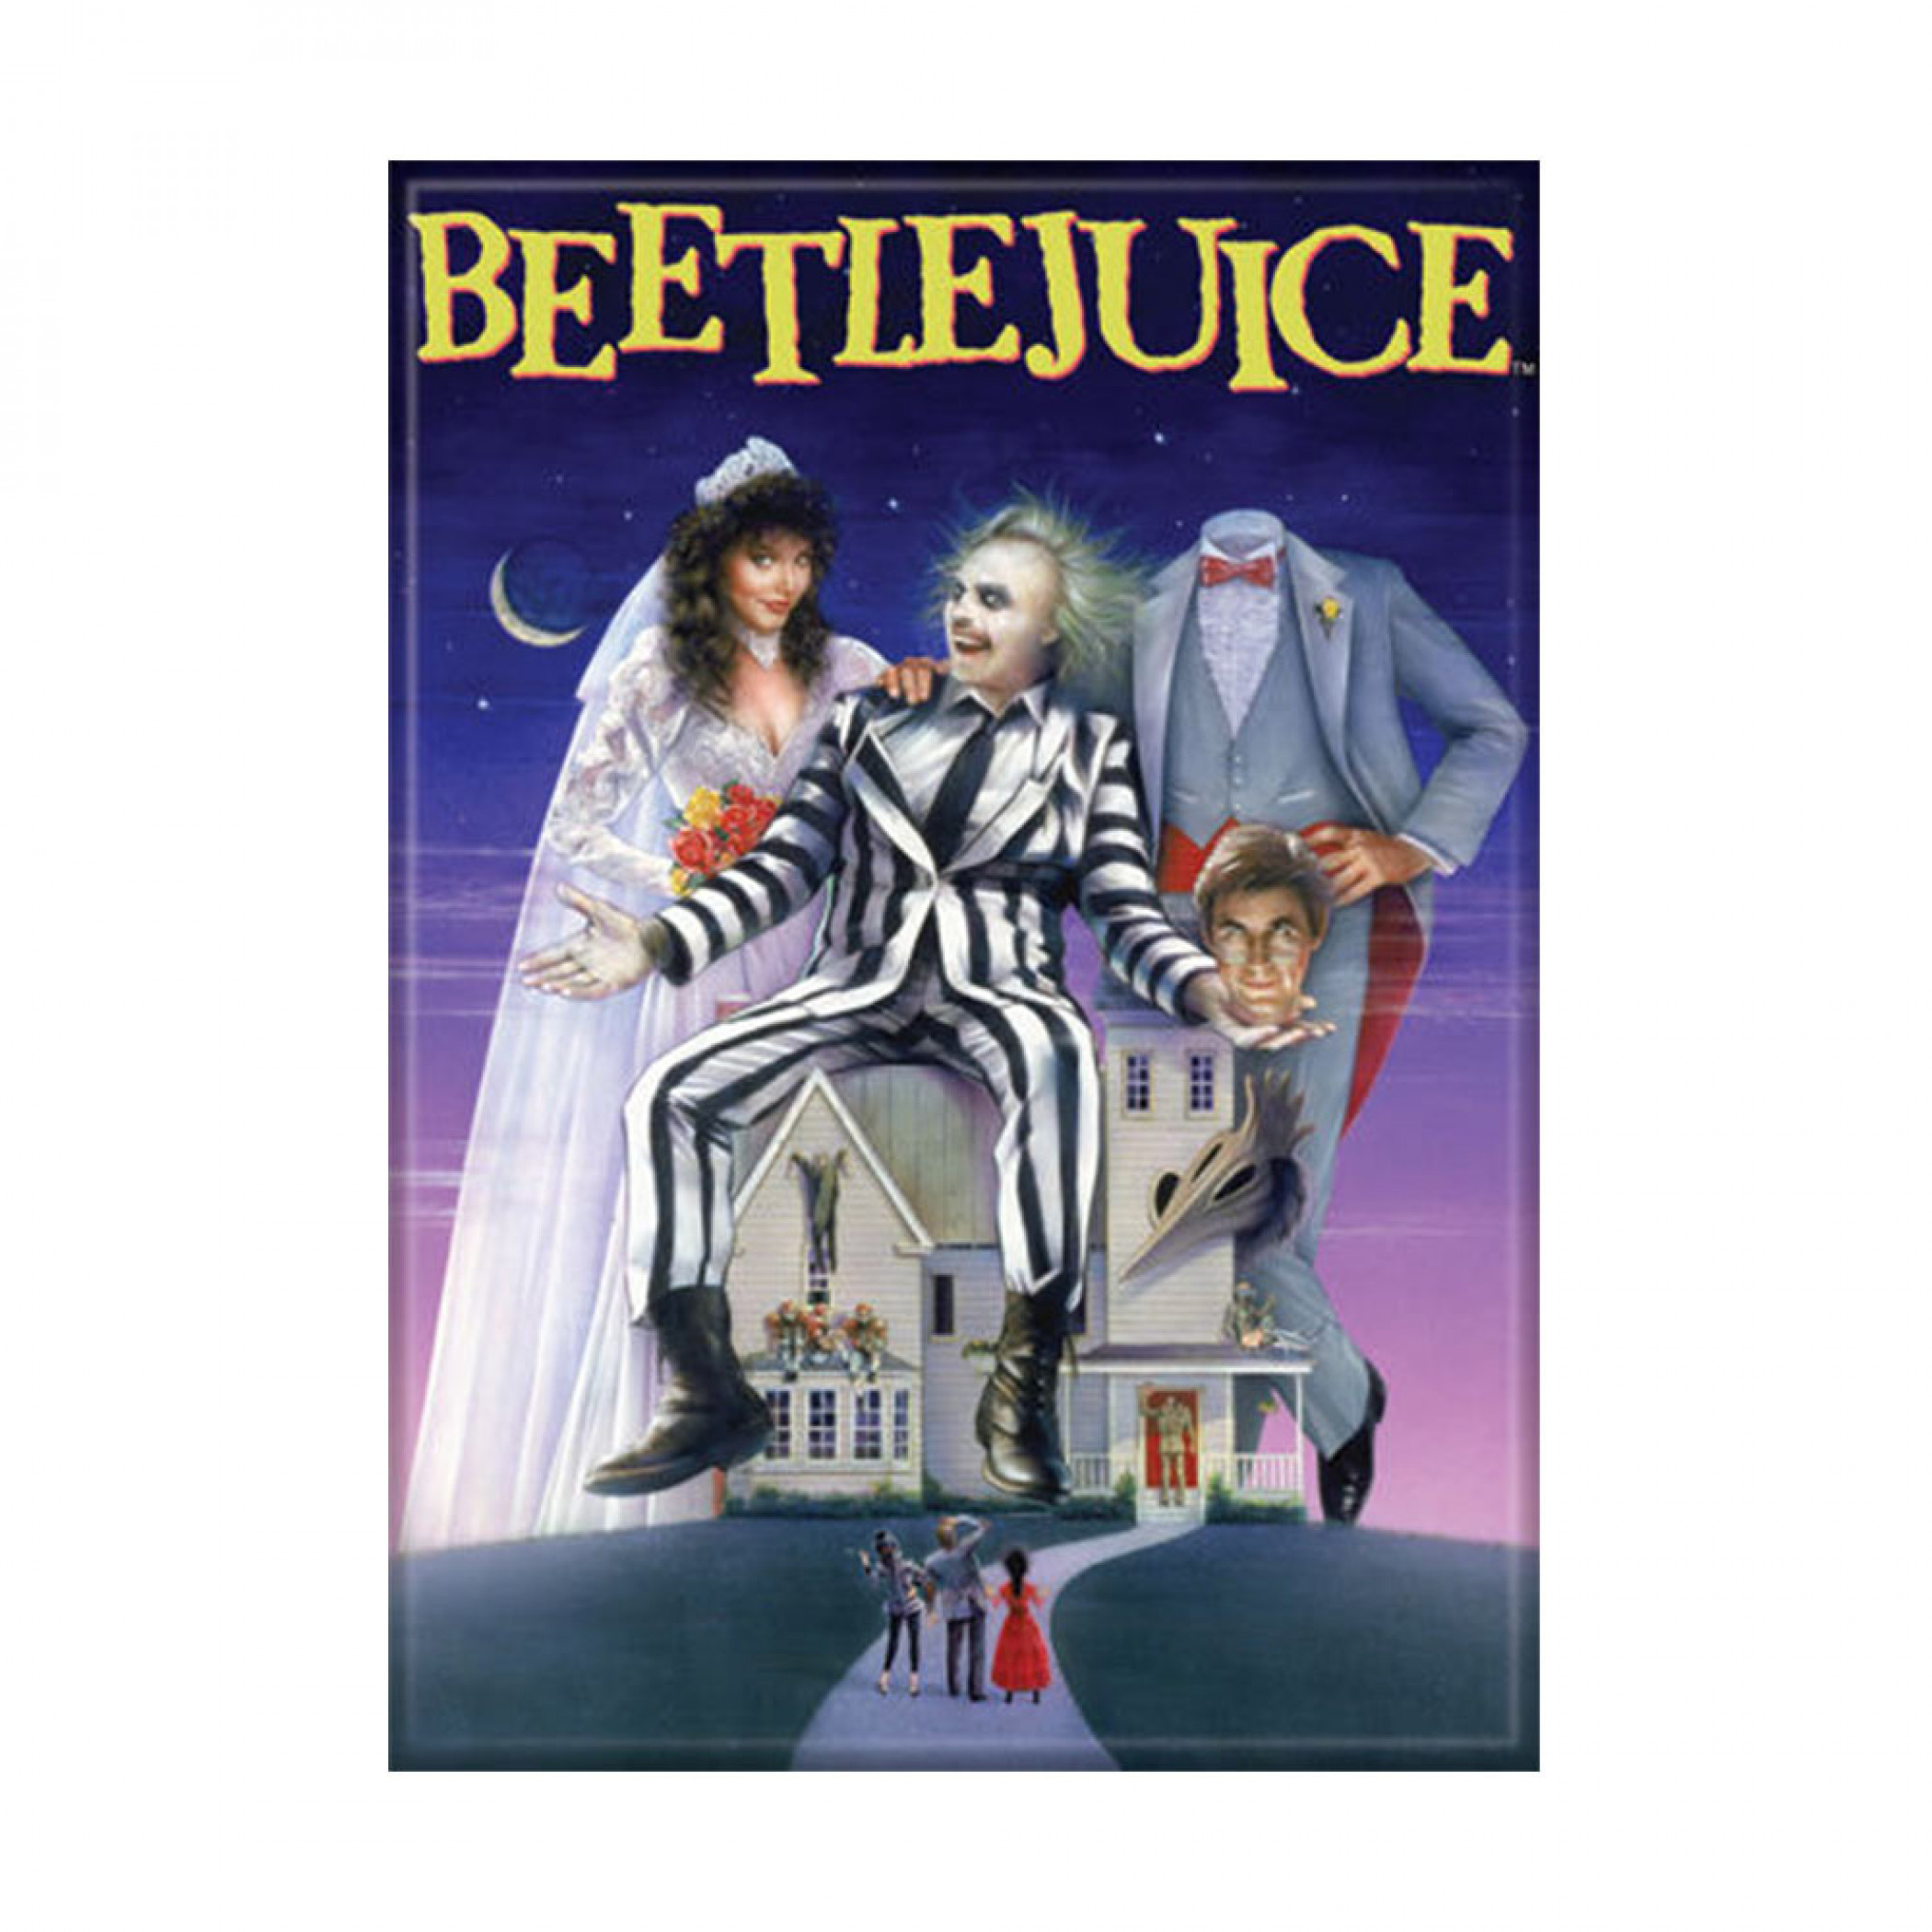 Beetlejuice Movie Poster Carded Magnet